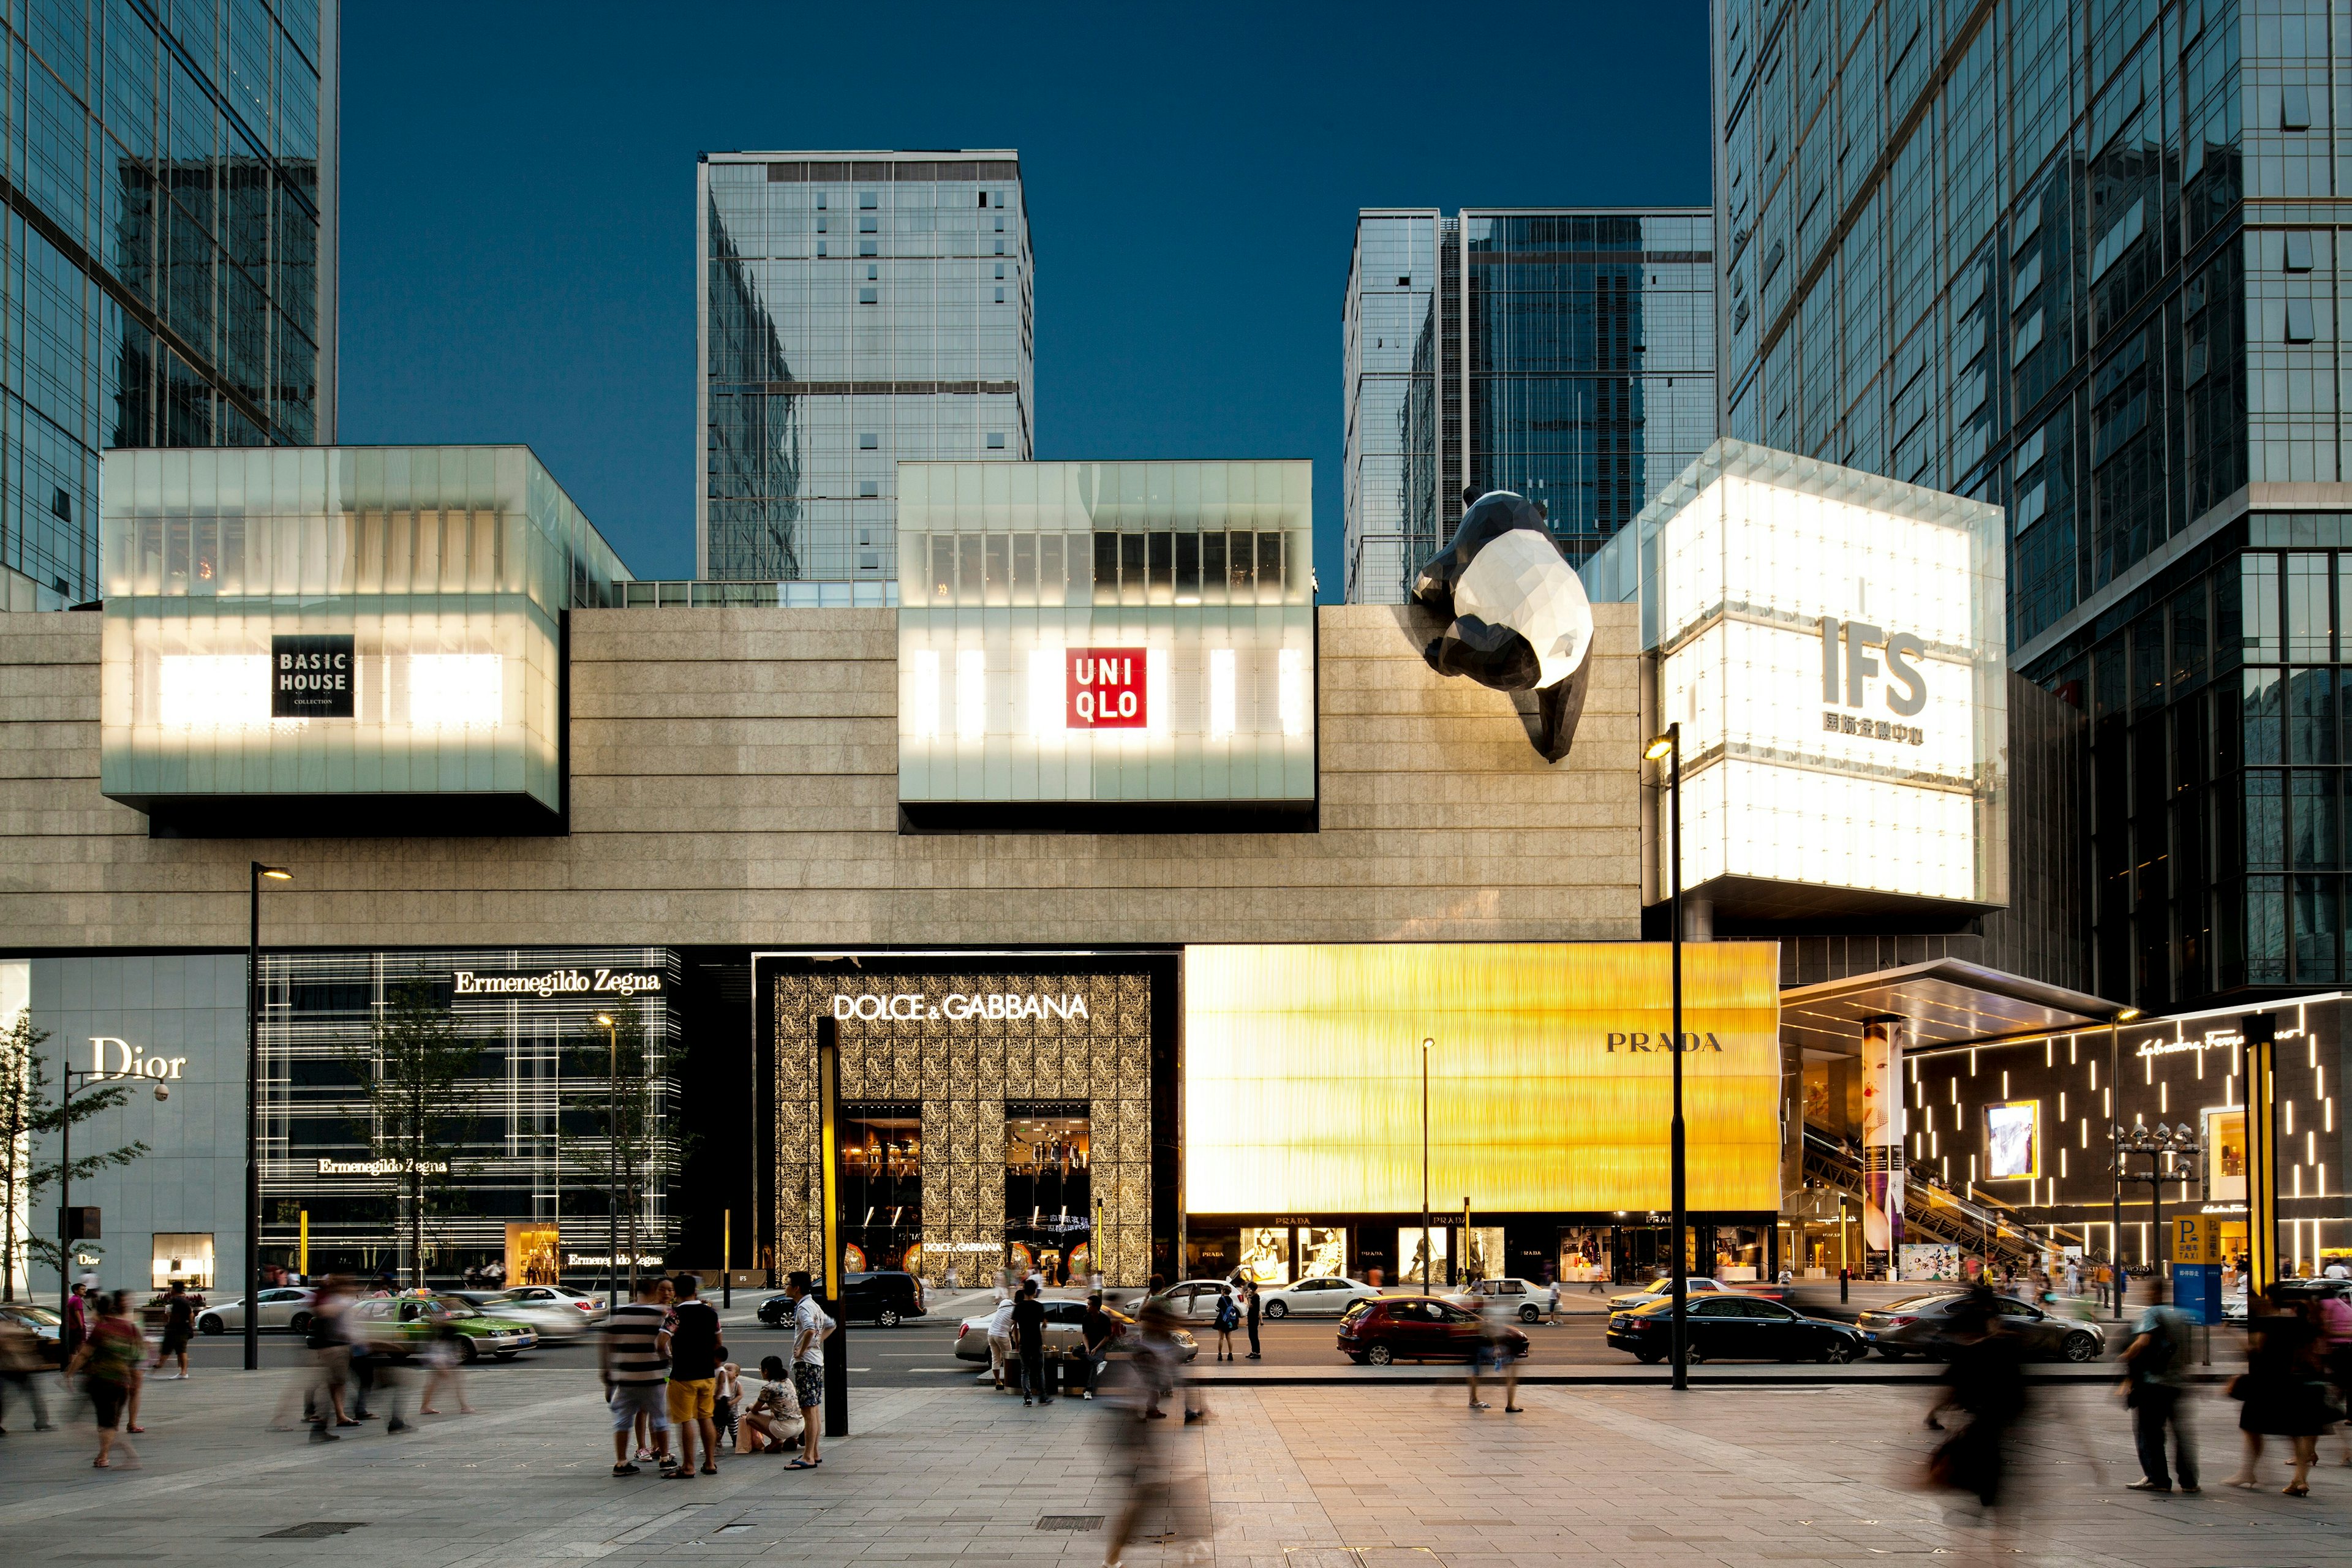 Chengdu IFS opened in 2014 and is now the top luxury shopping destination in the city, as well as one of the most influential premium malls in China’s Midwest region. Courtesy photo